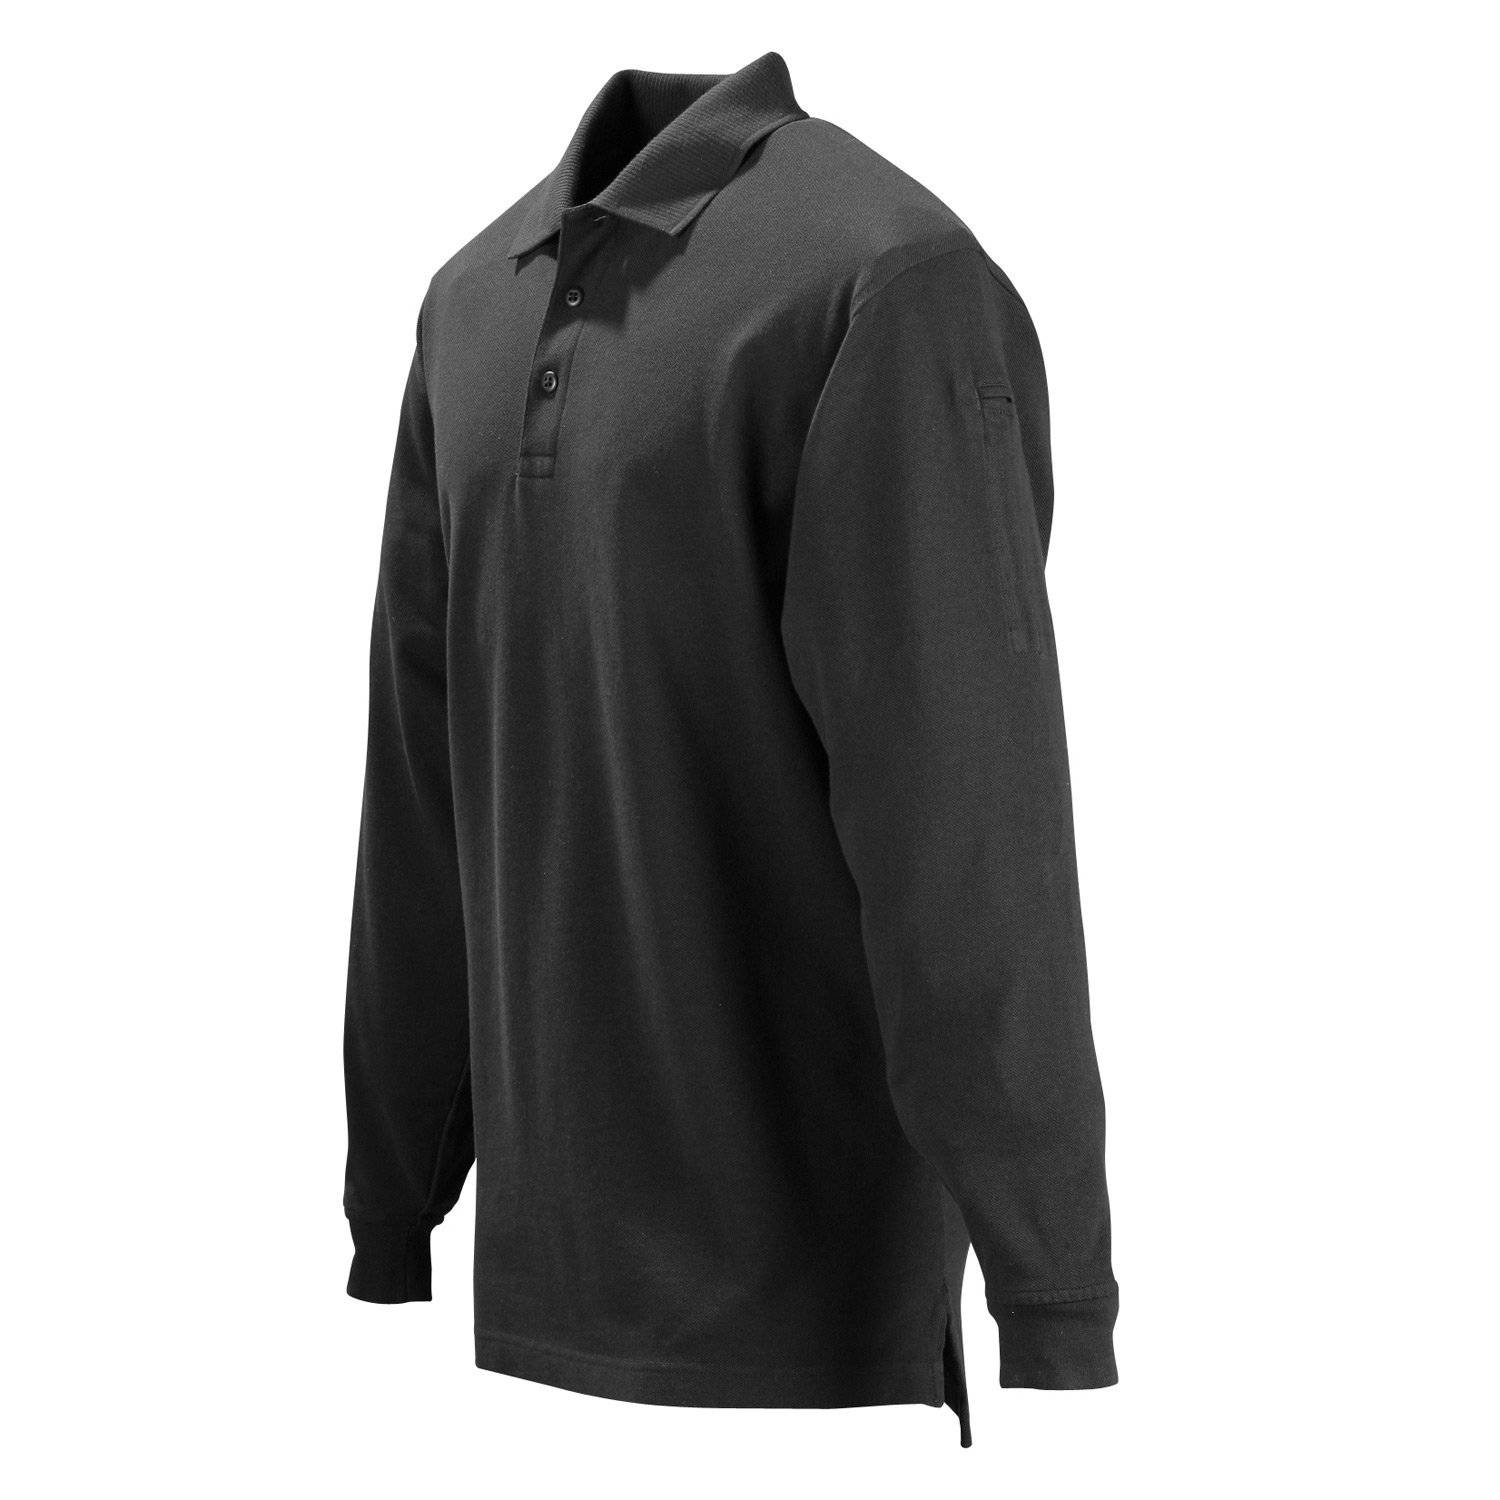 5.11 Tactical Long Sleeve Professional Polo